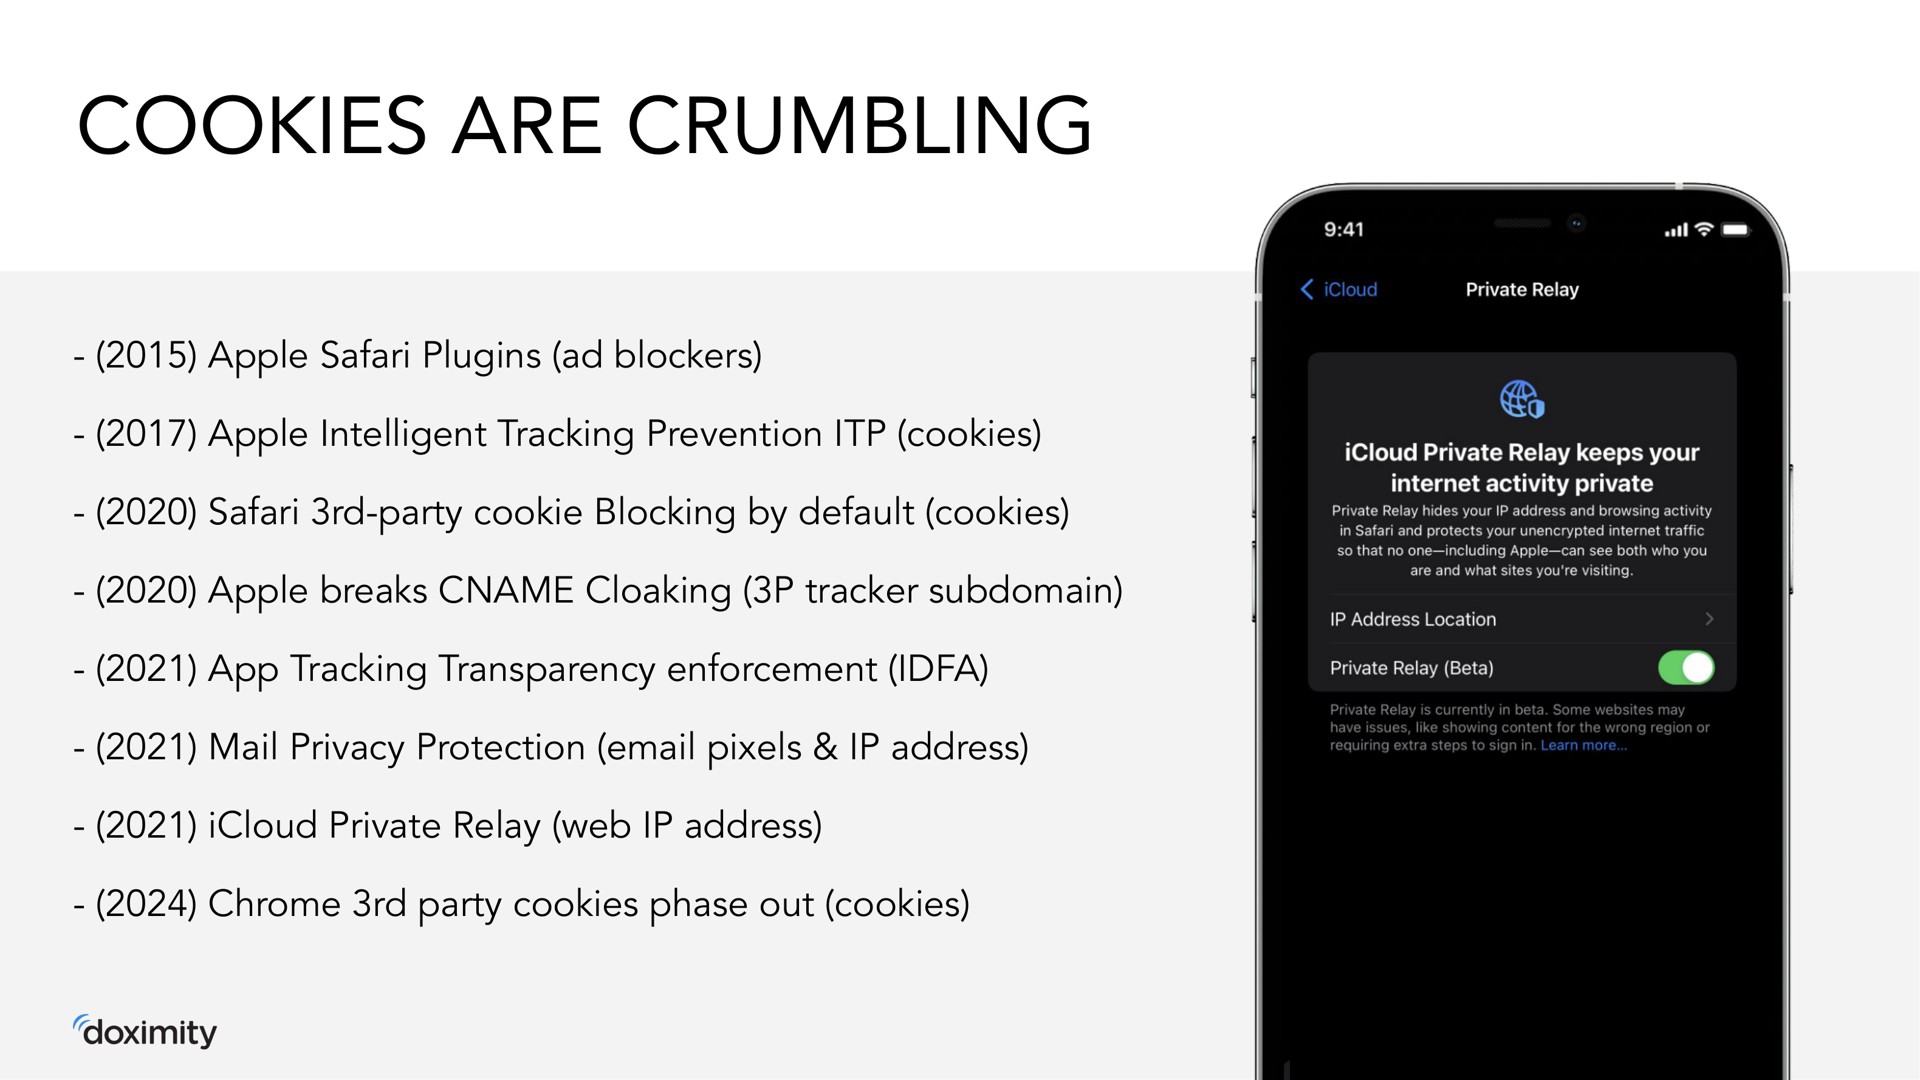 cookies are crumbling | Doximity